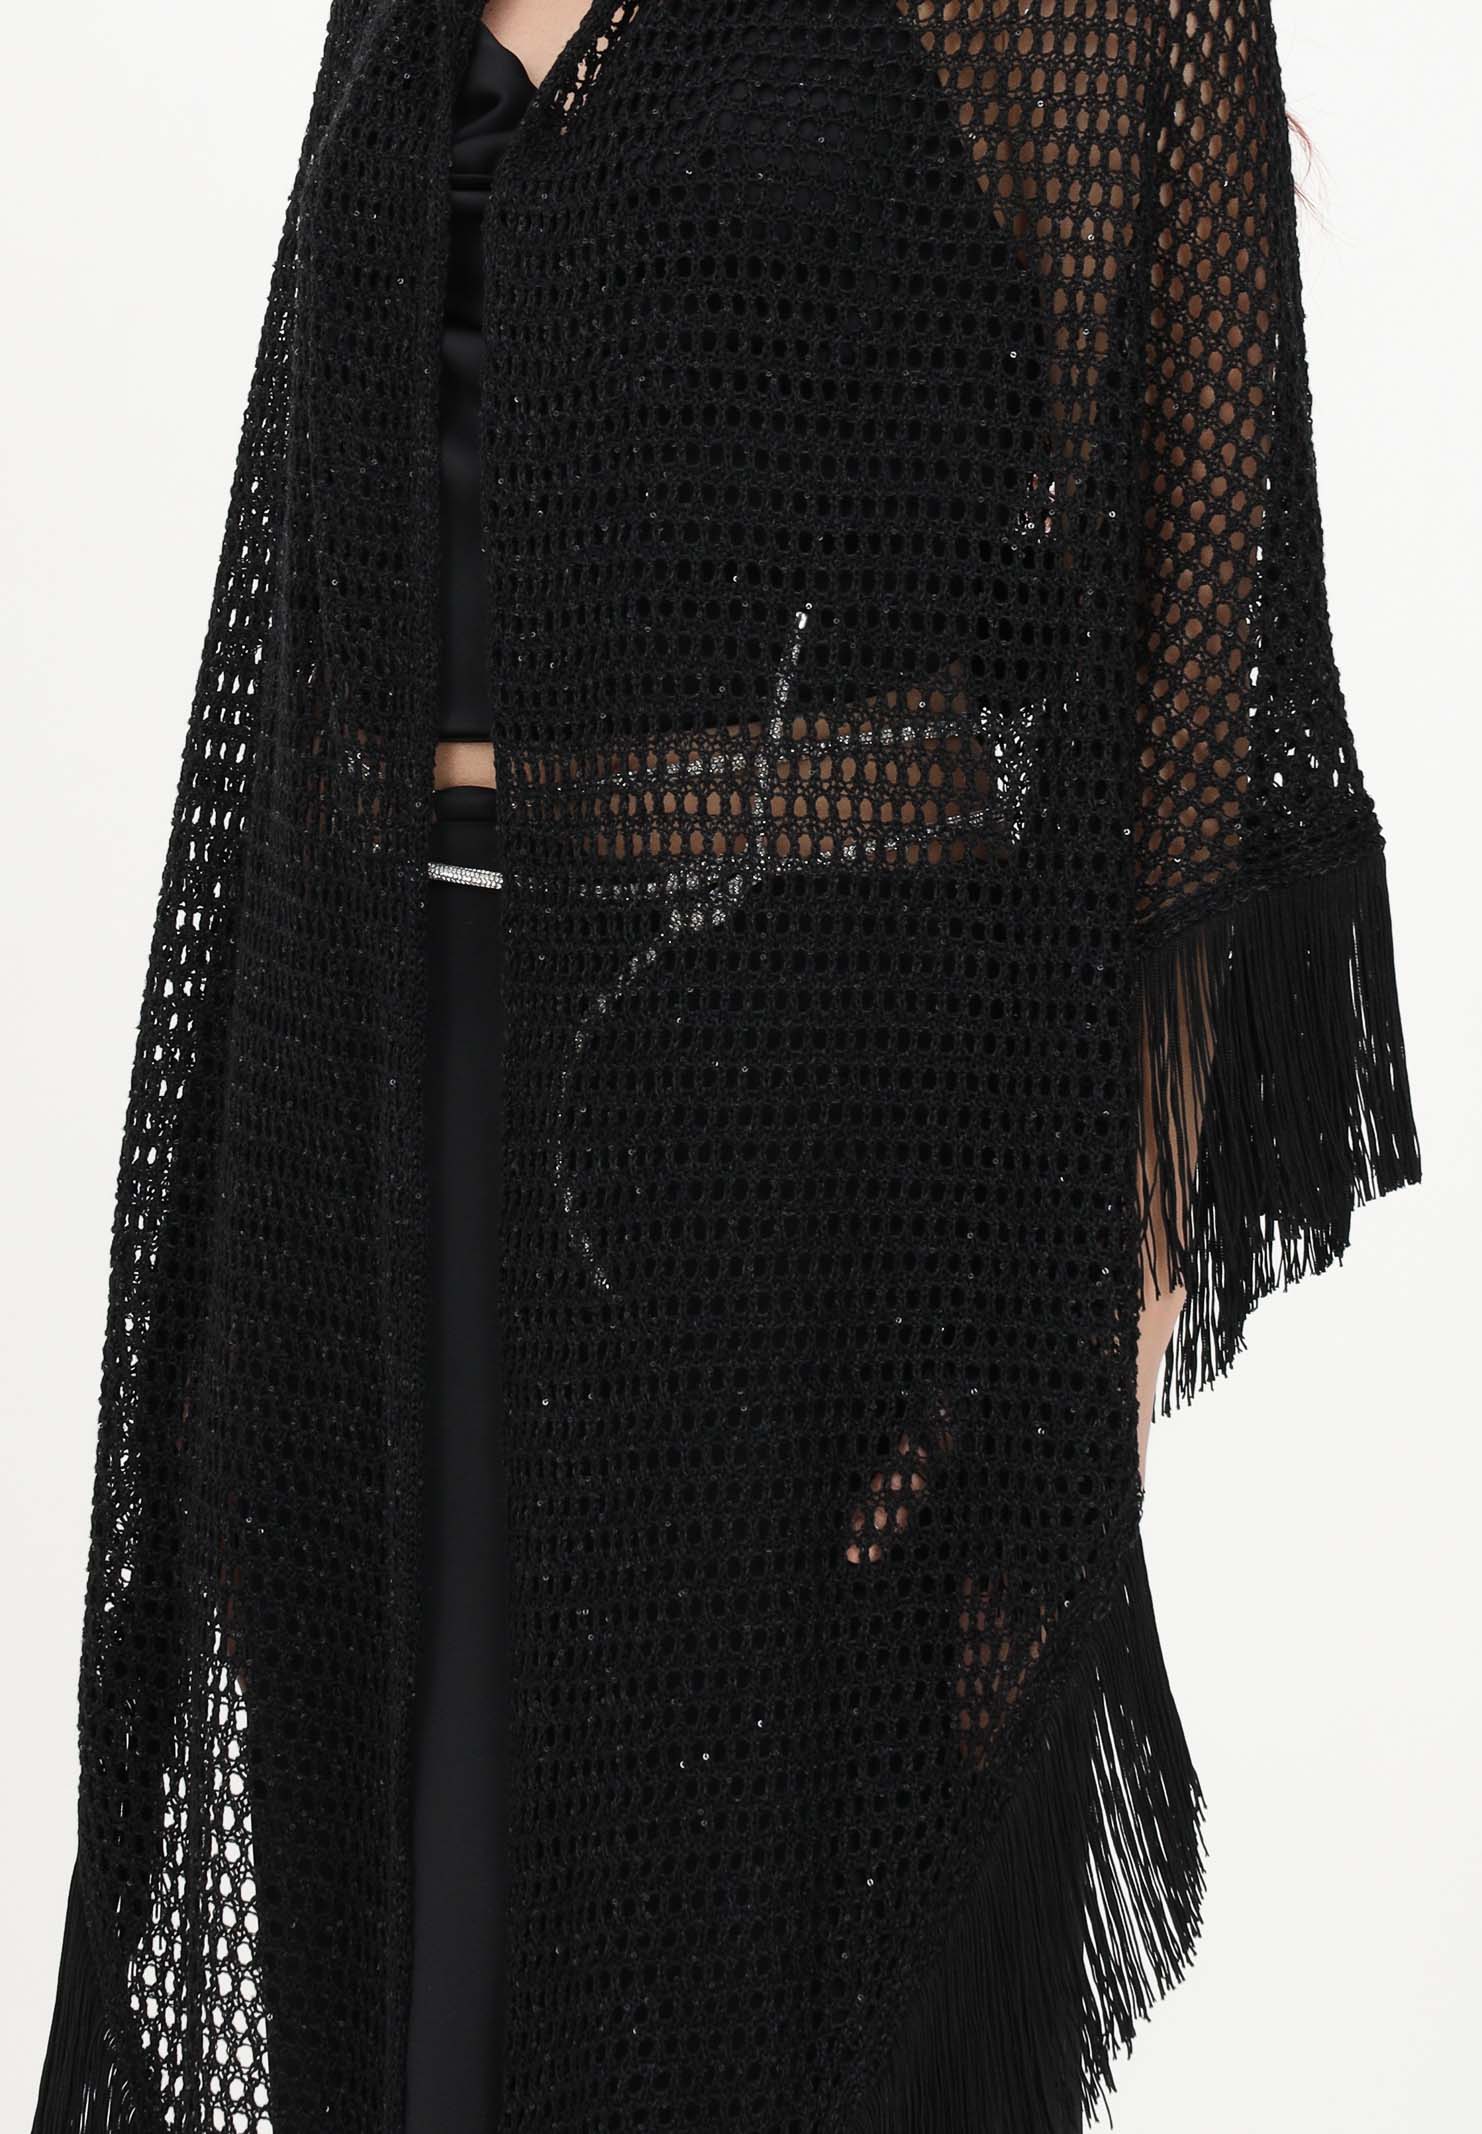 Women's black mesh cape with fringes and sequins SIMONA CORSELLINI | P23CPSLO02-01-C03300070003